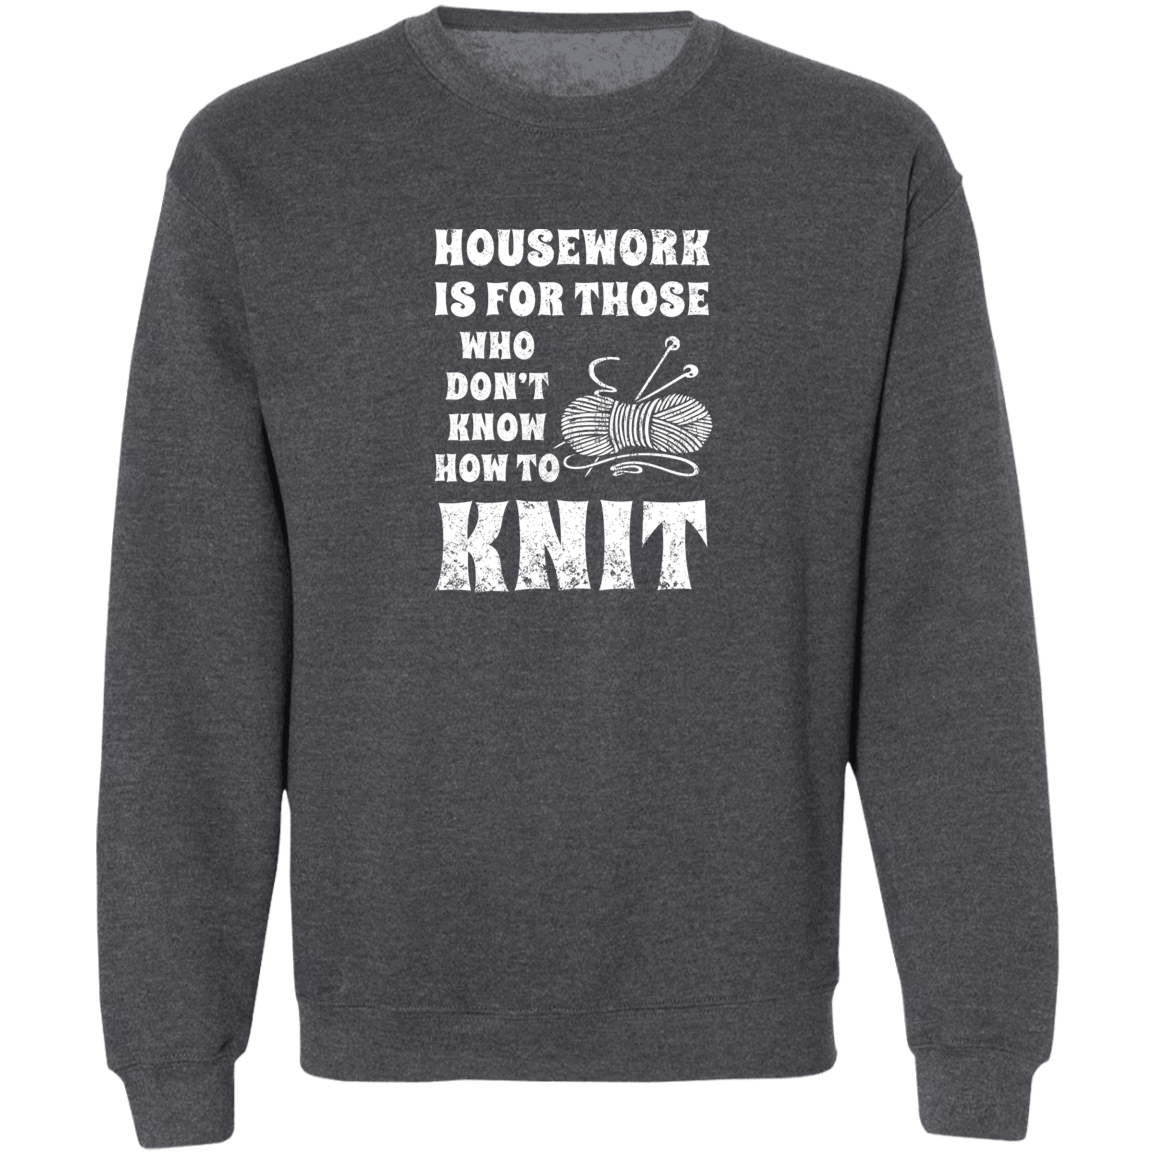 Housework is for Those Who Don't Know How to Knit Sweatshirt